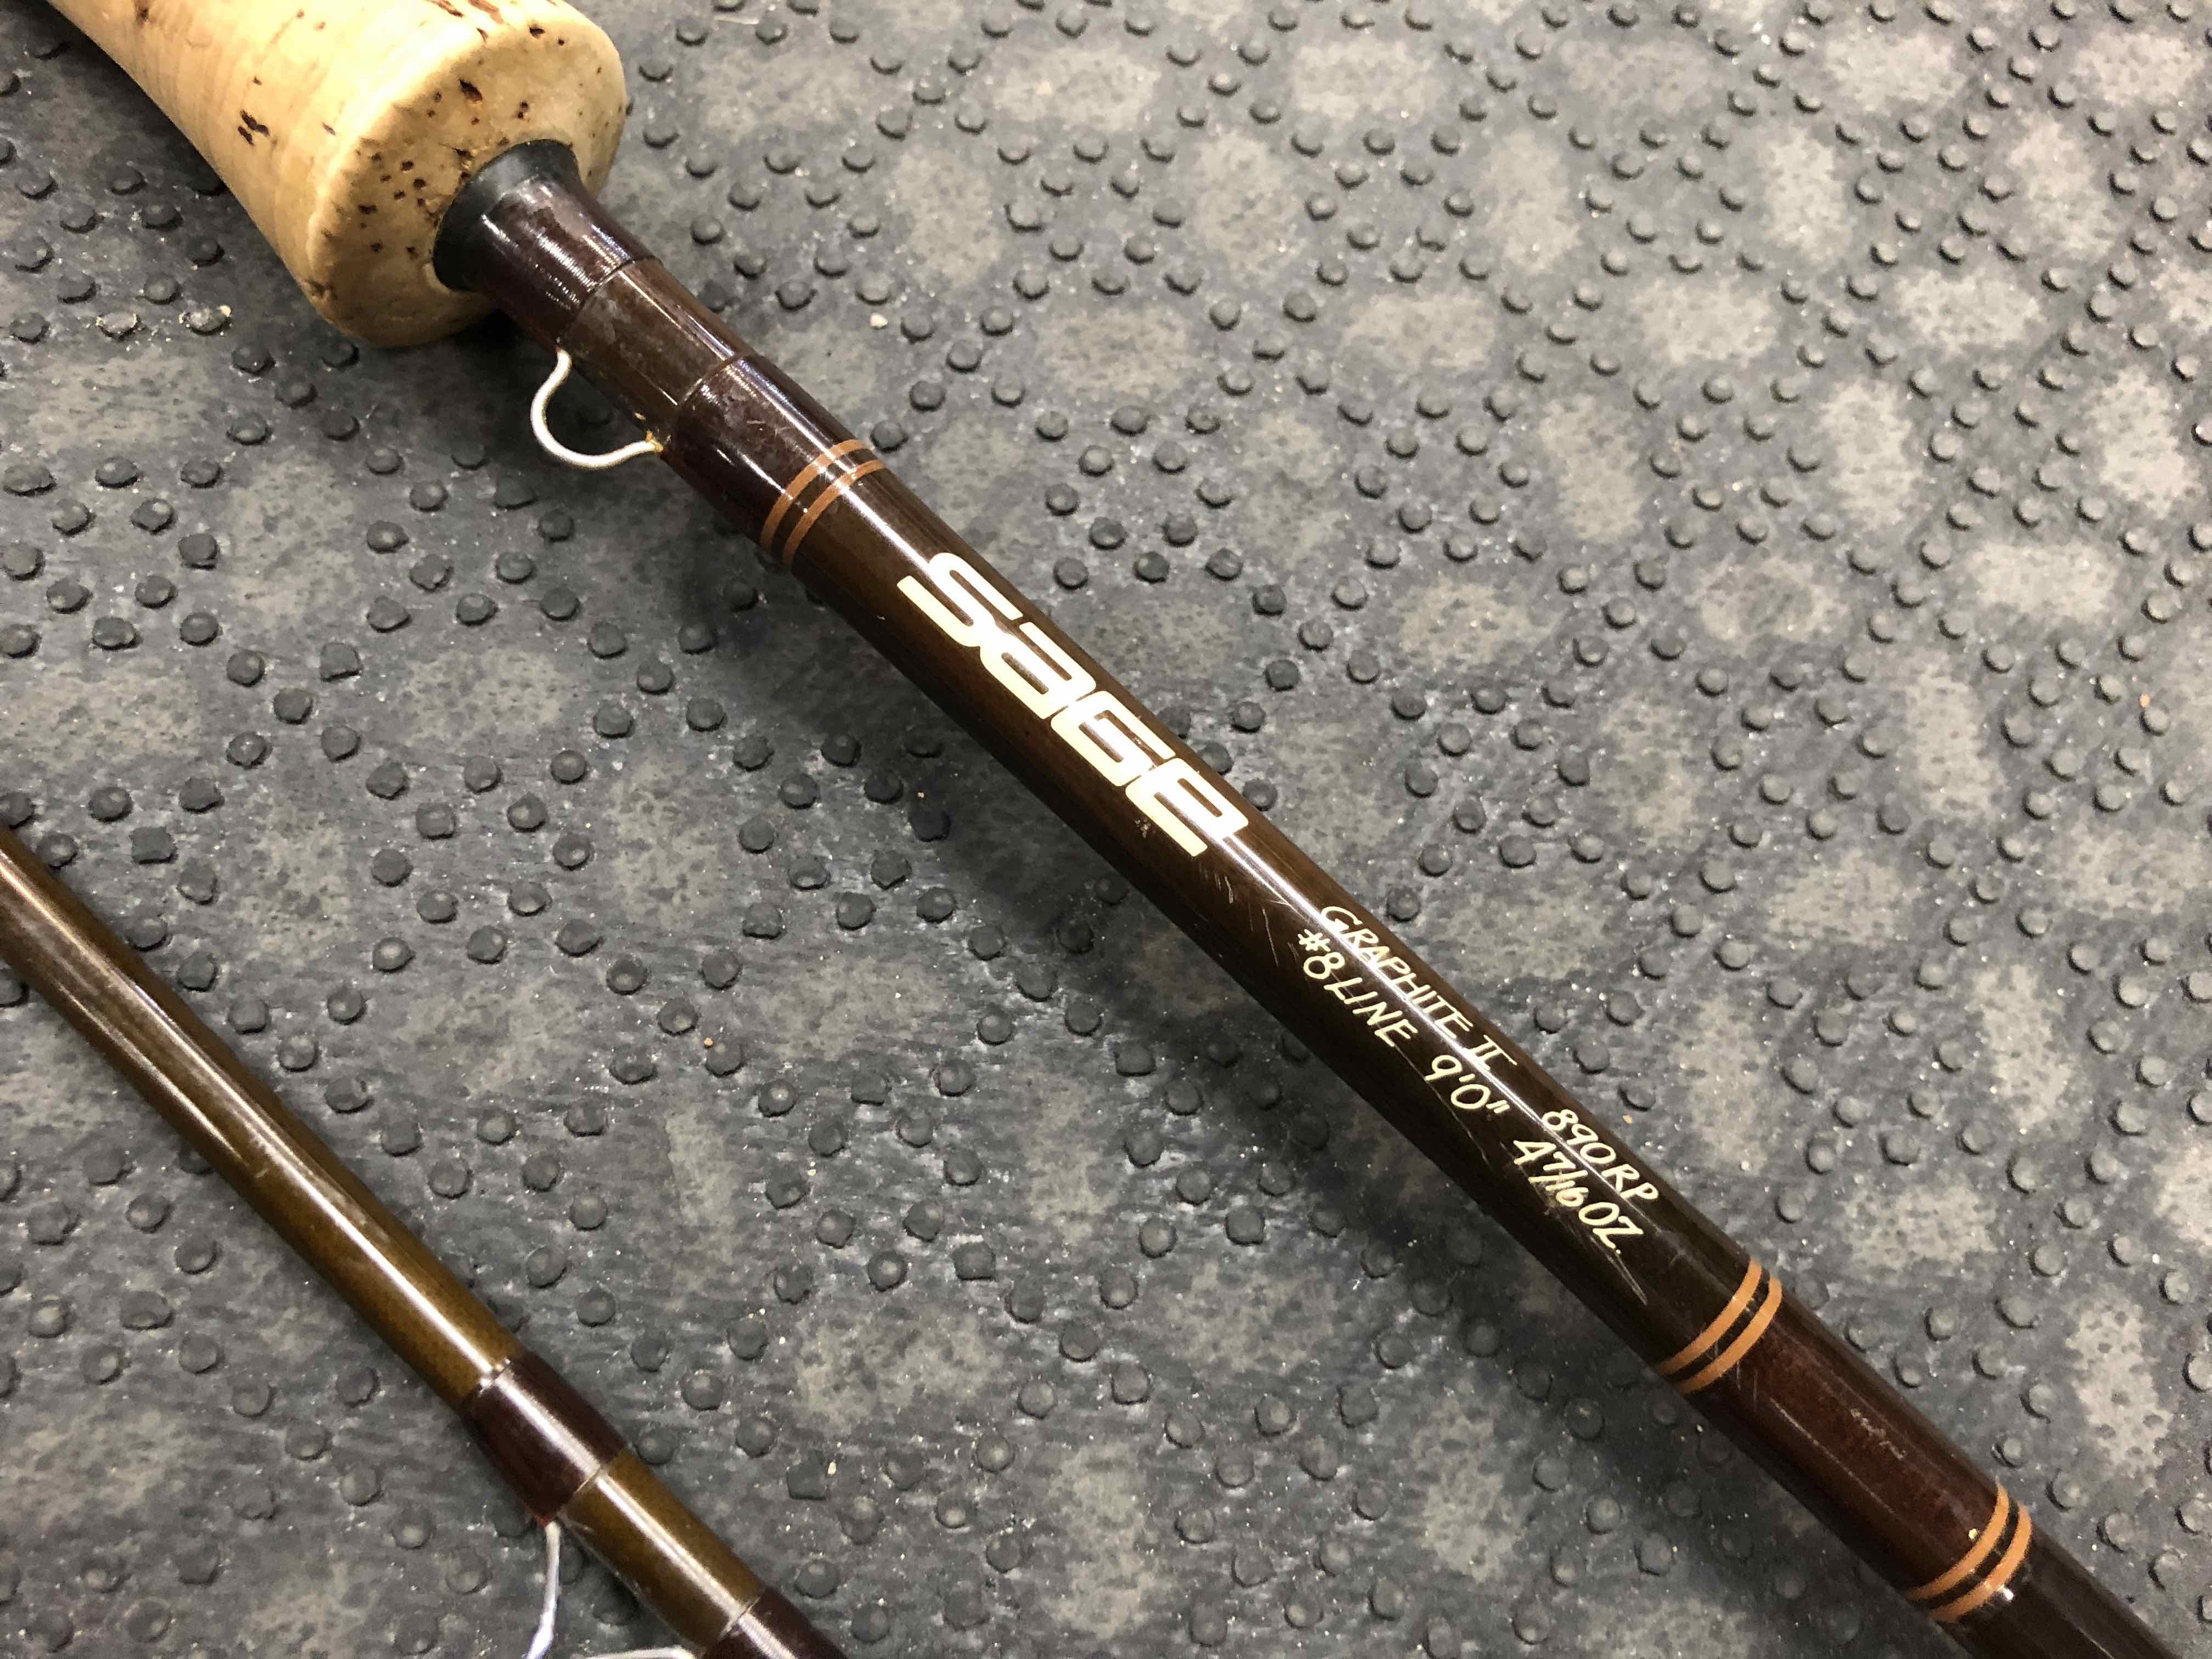 https://thefirstcast.ca/wp-content/uploads/2018/04/Sage-Graphite-II-890RP-9foot-8weight-2piece-Fly-Rod-AA.jpg